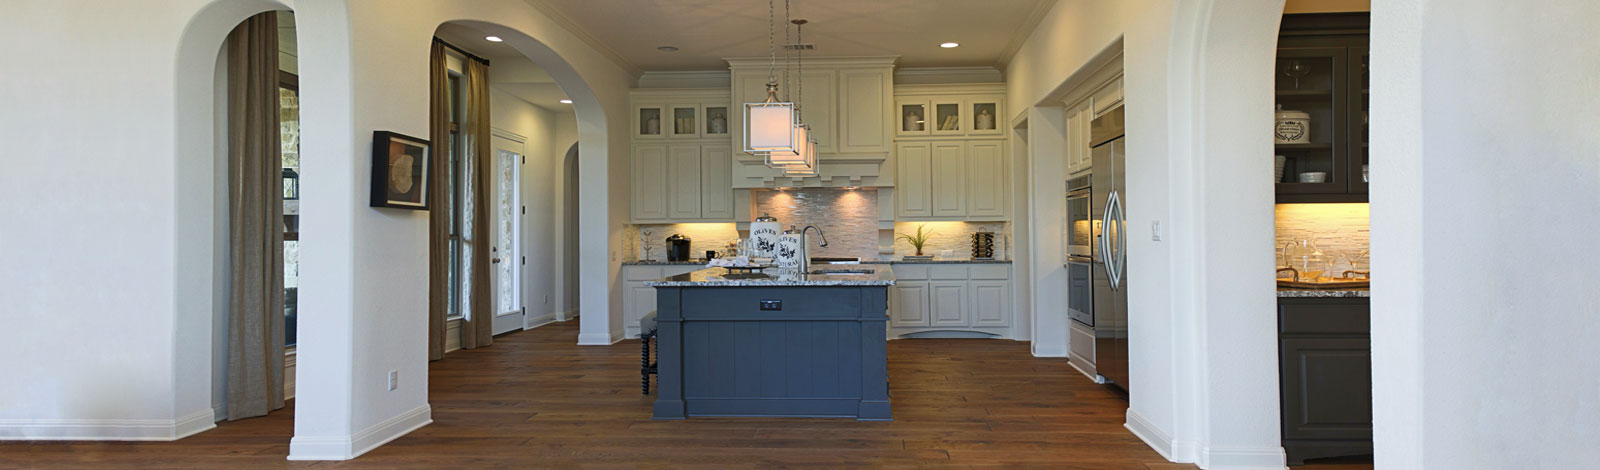 Burrows Cabinets' kitchen in bone with umber island